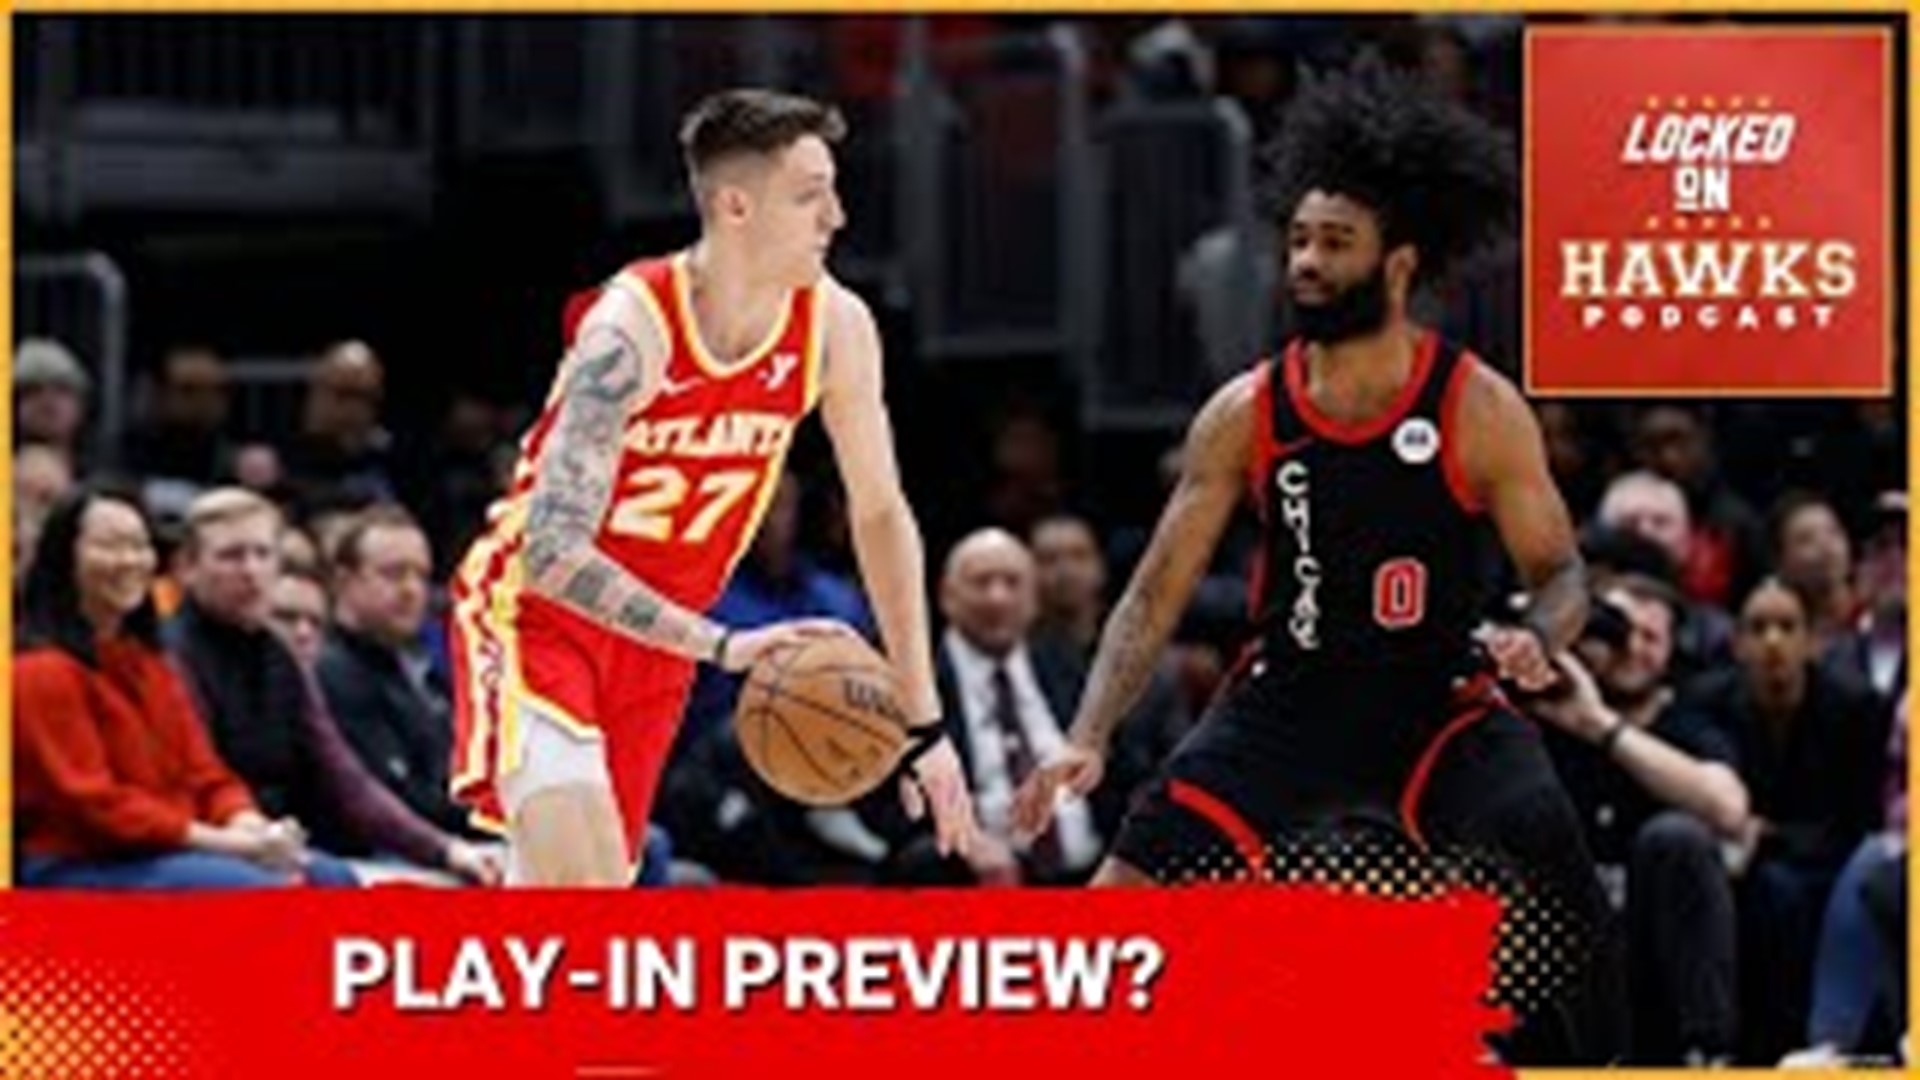 Brad Rowland hosts episode No. 1685 of the Locked on Hawks podcast. The show breaks down Monday’s game between the Atlanta Hawks and the Chicago Bulls.